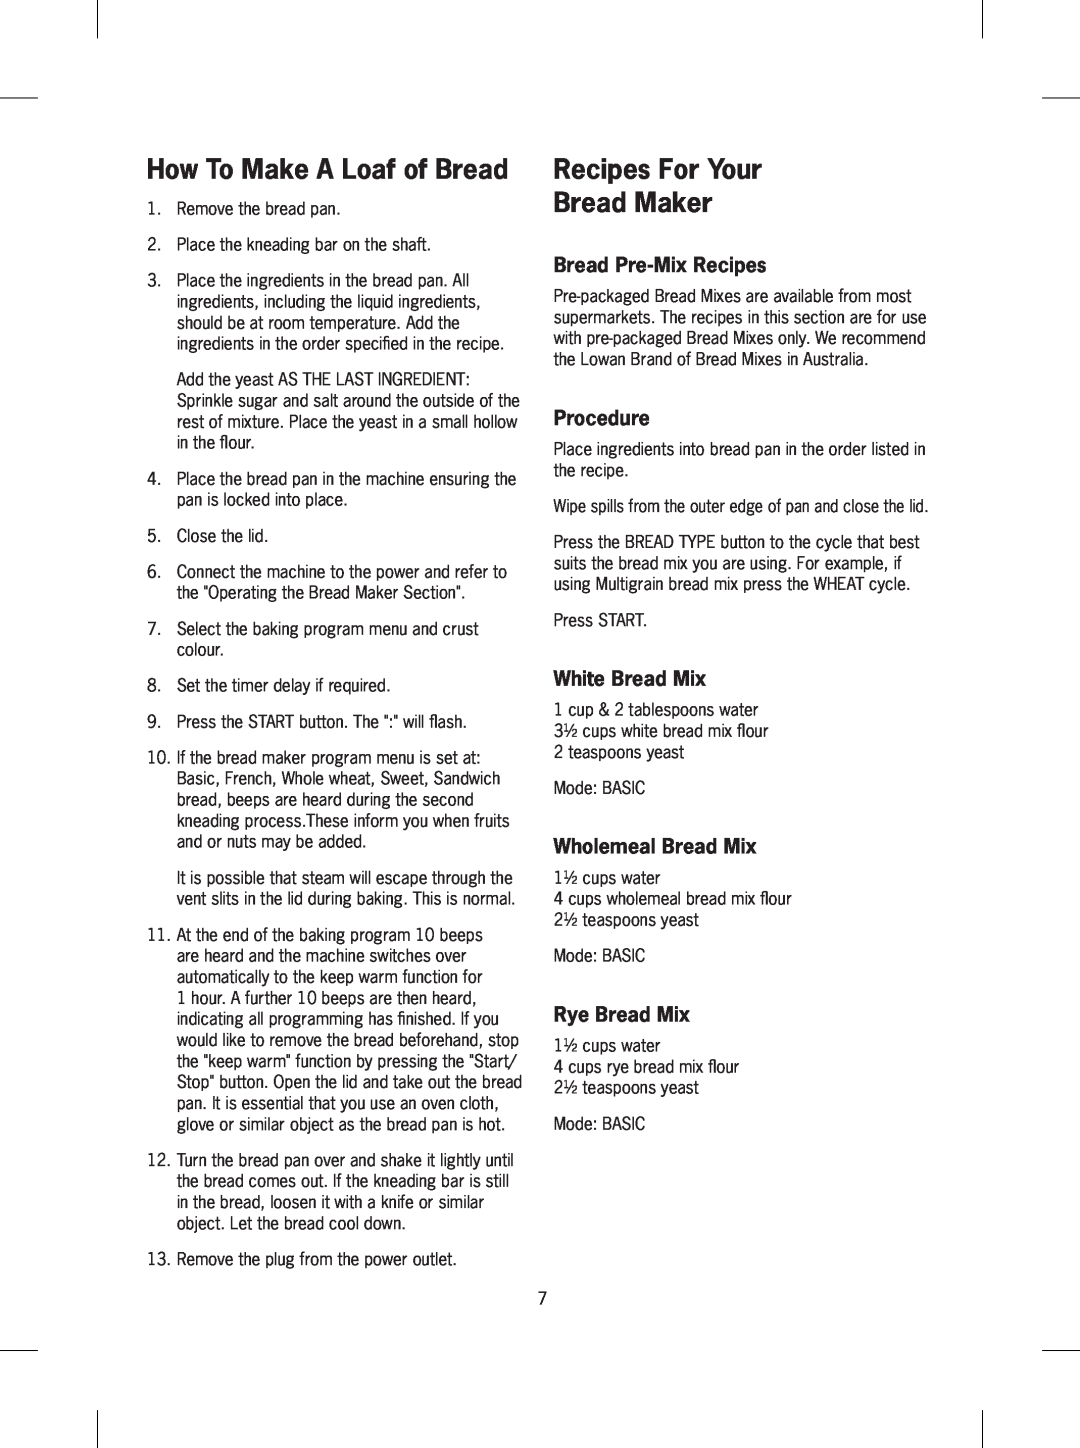 Black & Decker BMH110 manual How To Make A Loaf of Bread, Recipes For Your Bread Maker, Bread Pre-Mix Recipes, Procedure 